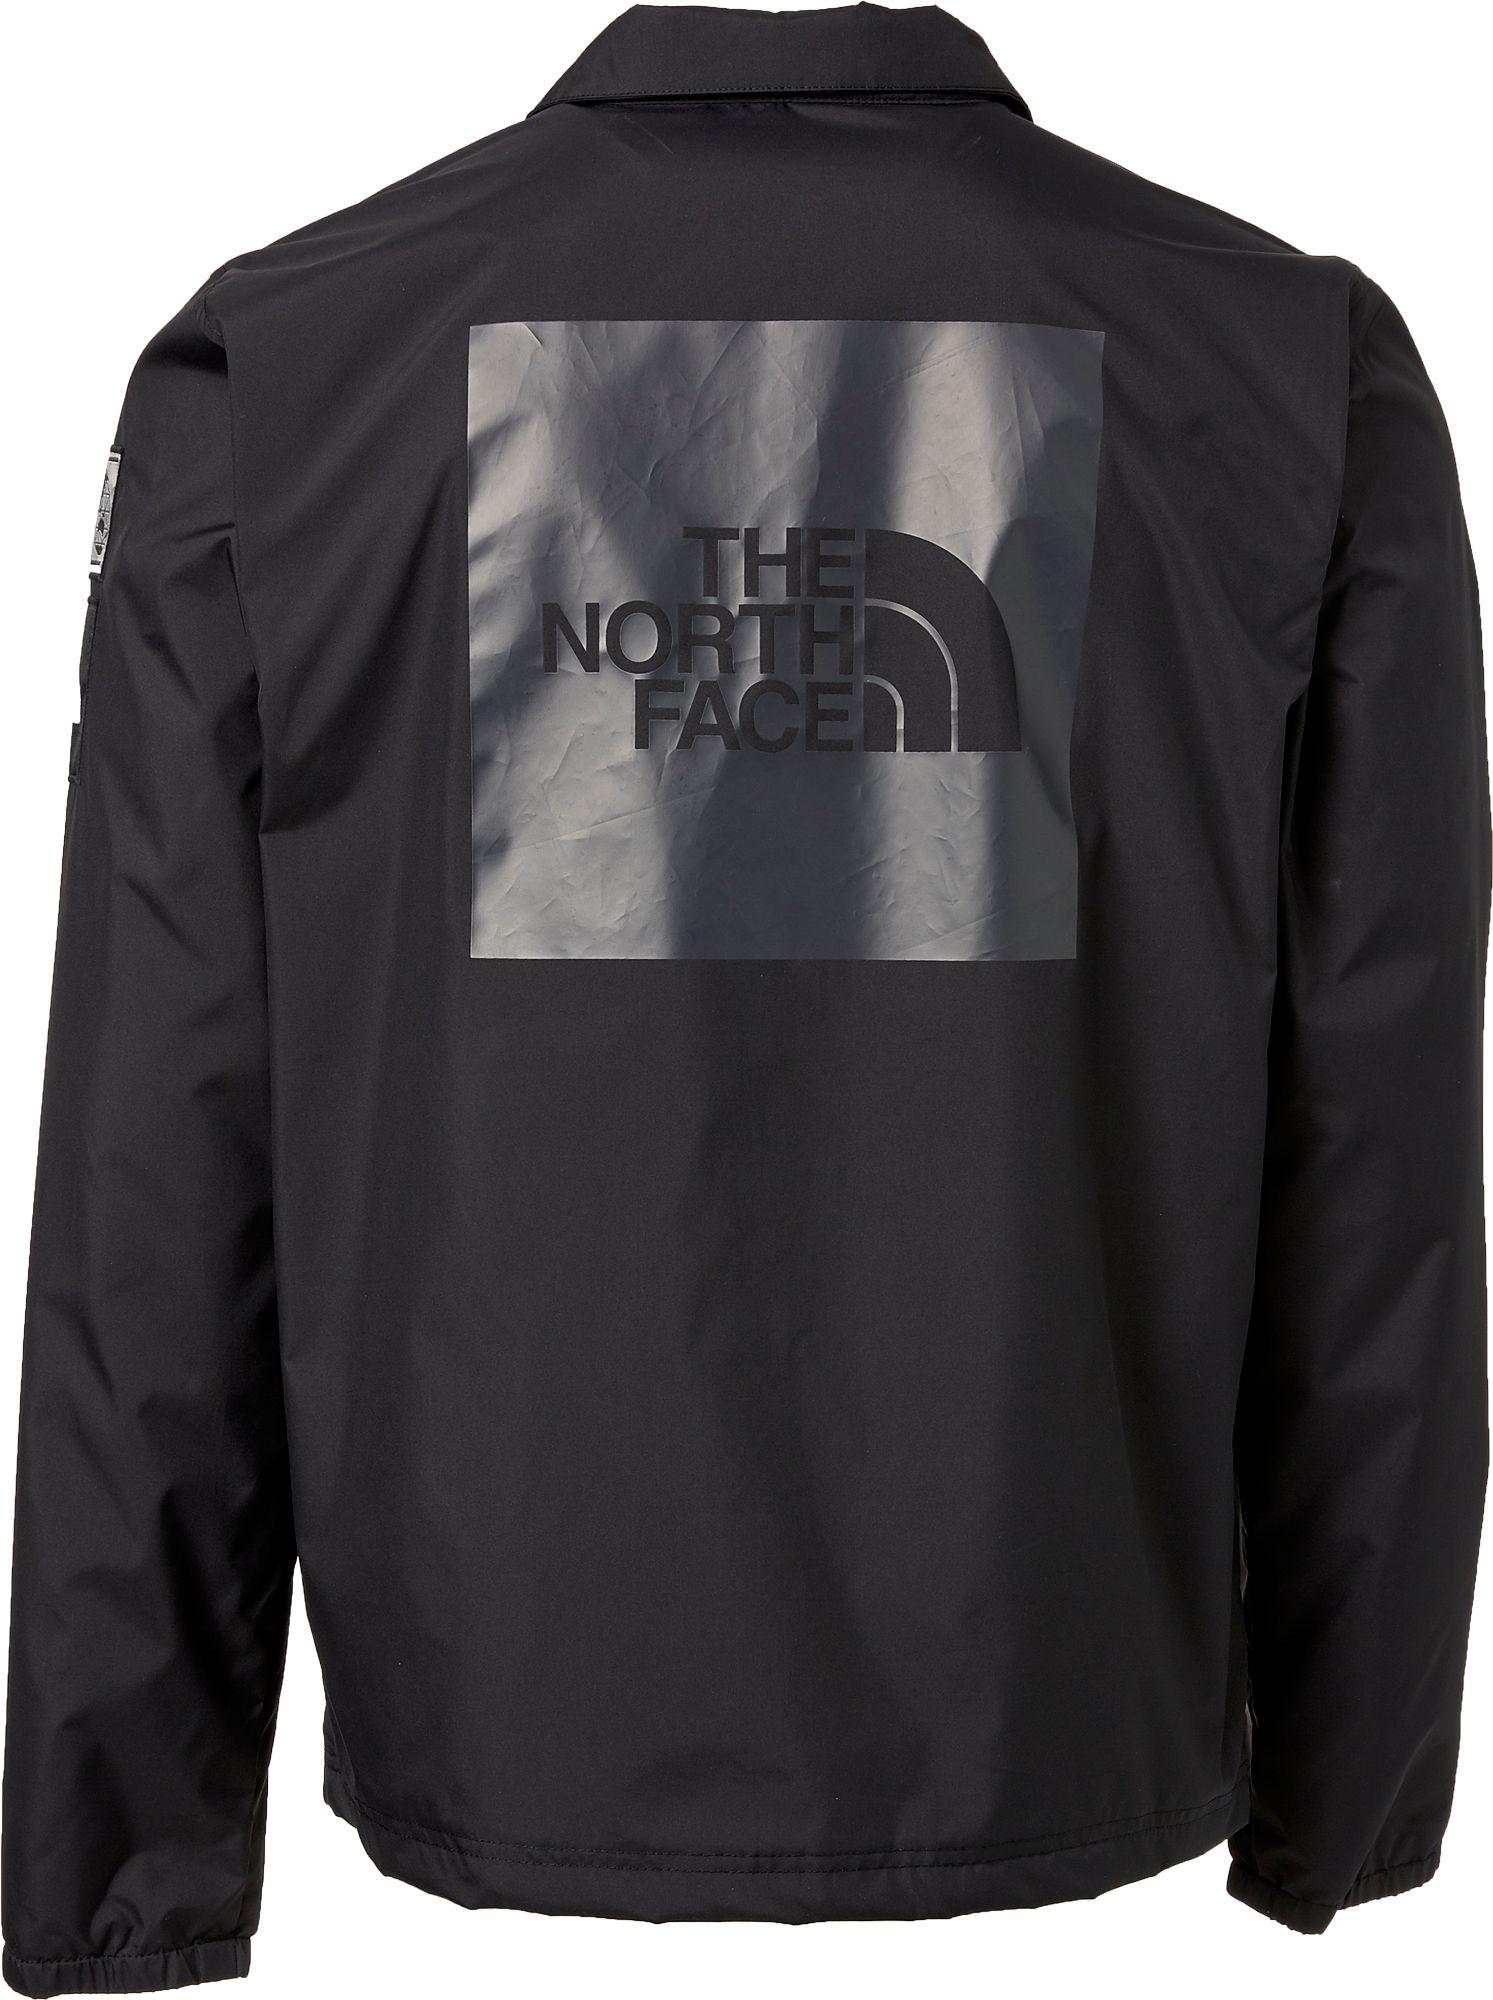 The North Face Synthetic International Collection Coaches Jacket in Black  for Men - Lyst